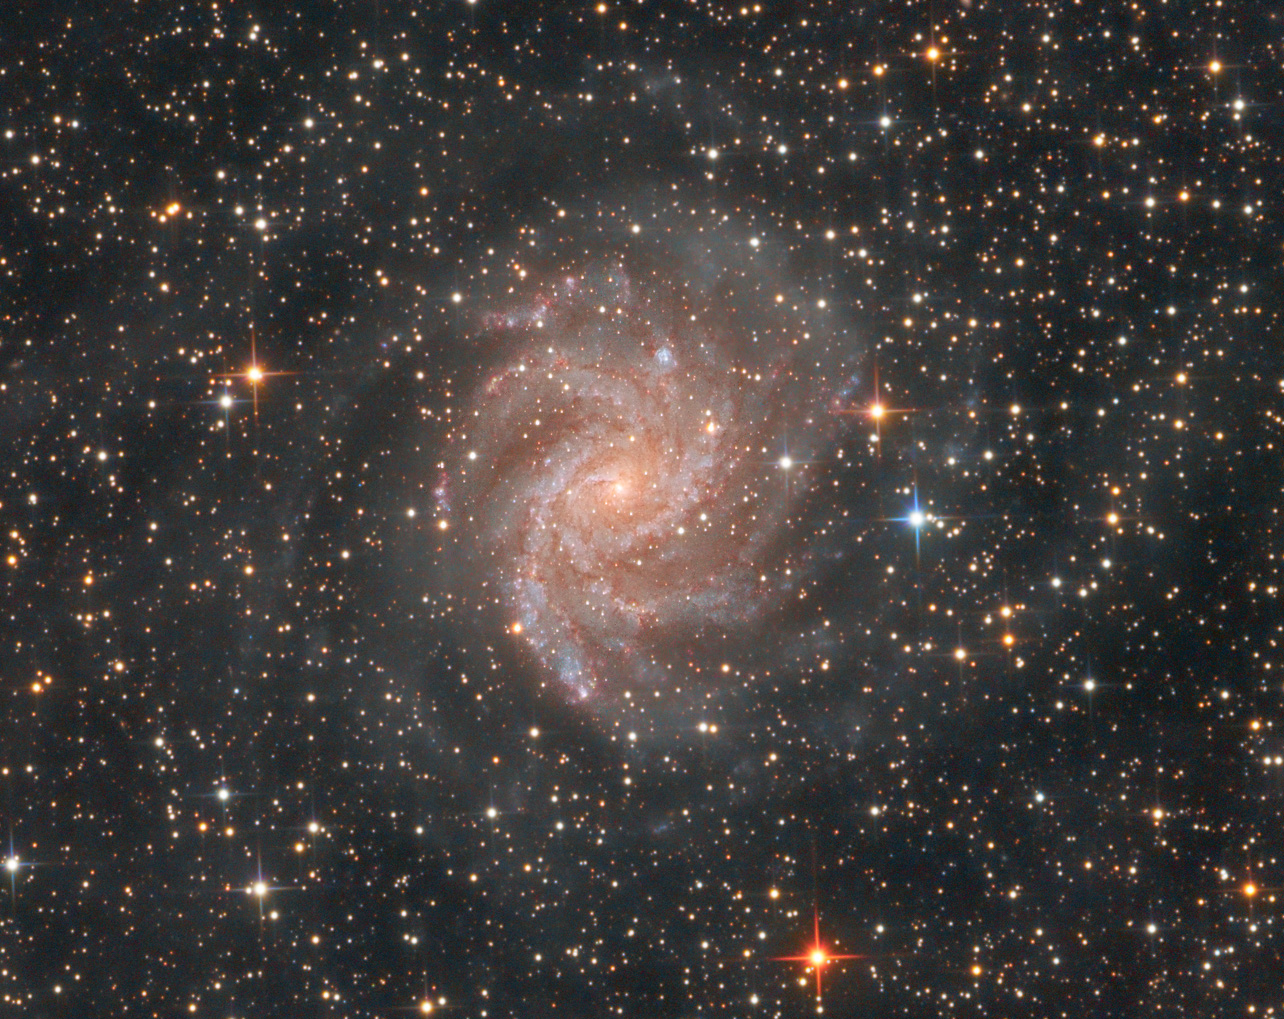 A Zoom on the Galaxy NGC 6946 - The Fireworks Galaxy